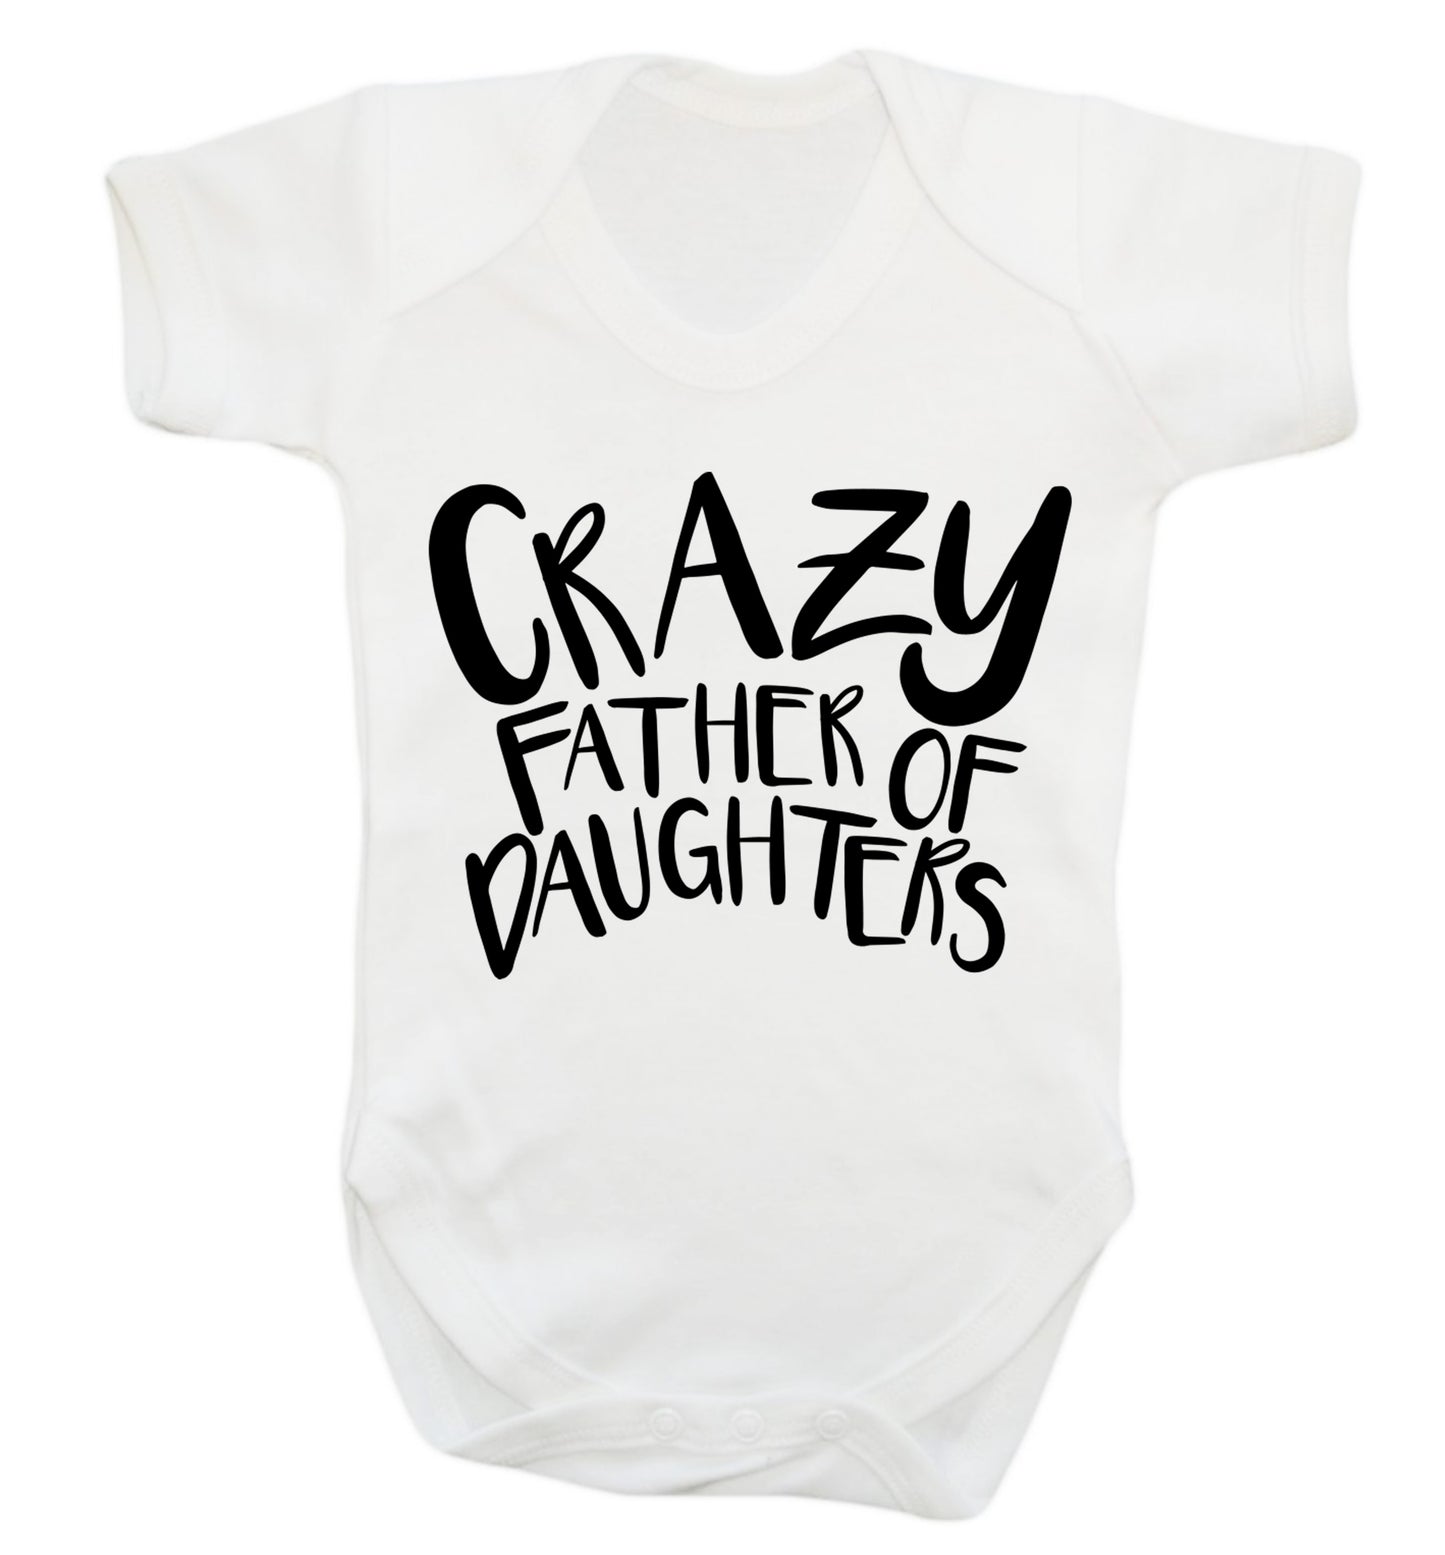 Crazy father of daughters Baby Vest white 18-24 months